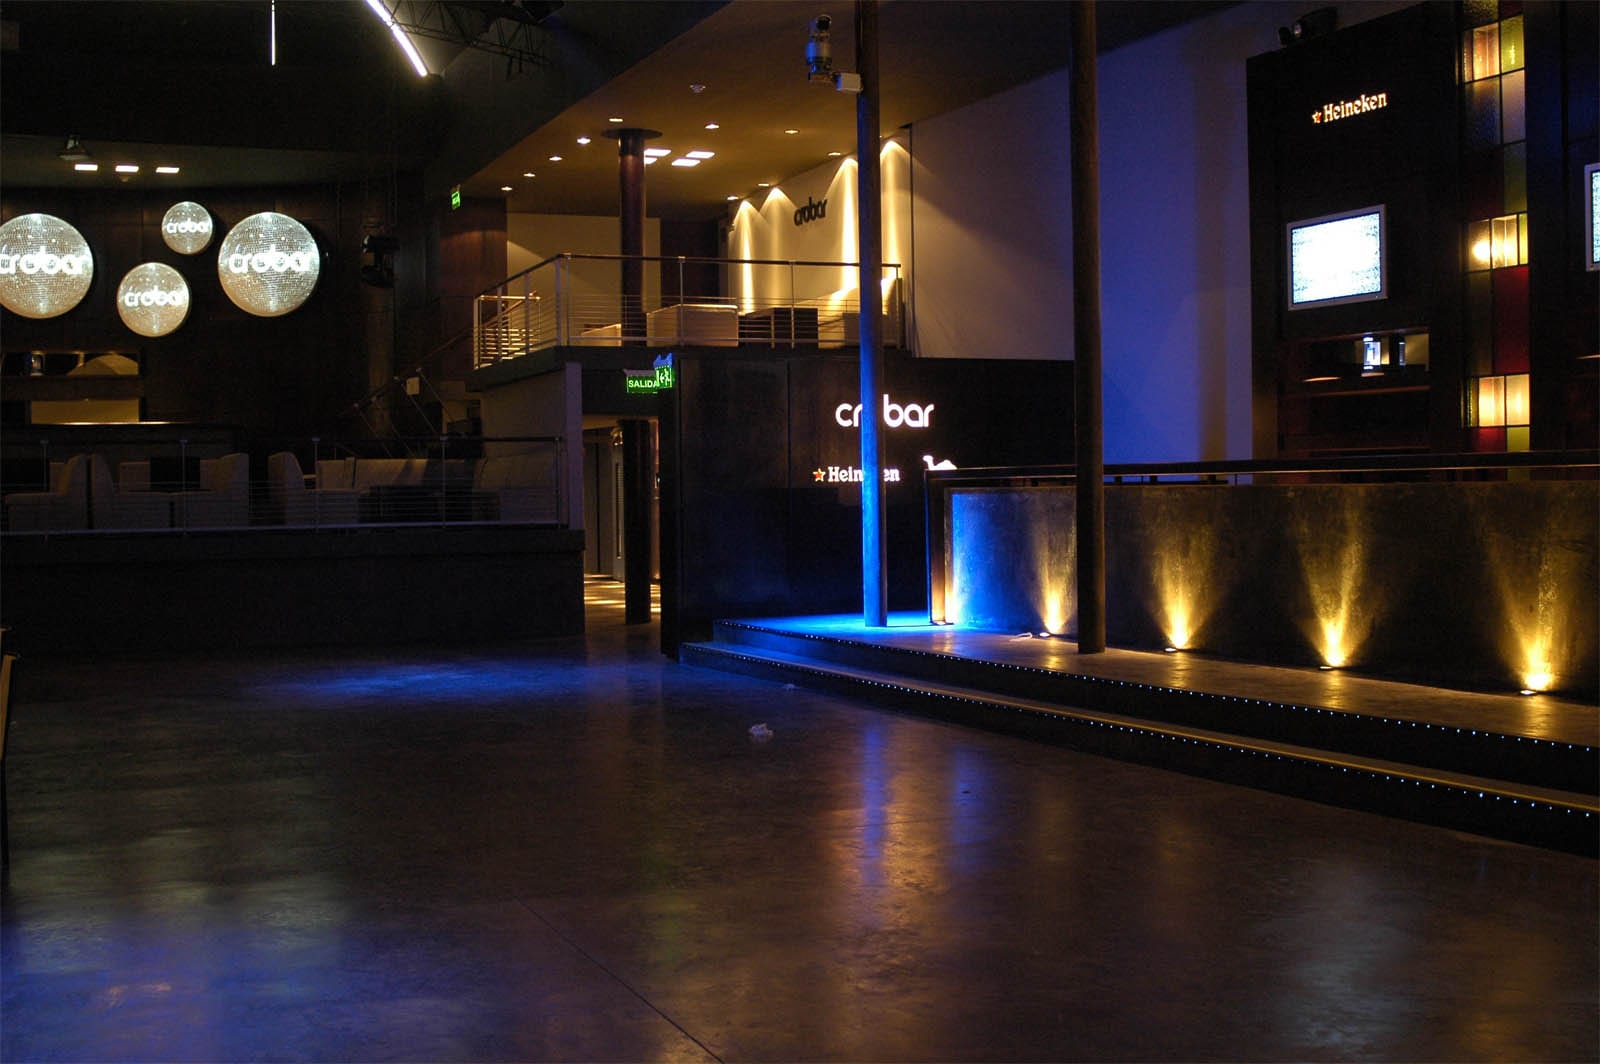 Crobar Buenos Aires Hotel Restaurant And Nightclub Design By Big Time